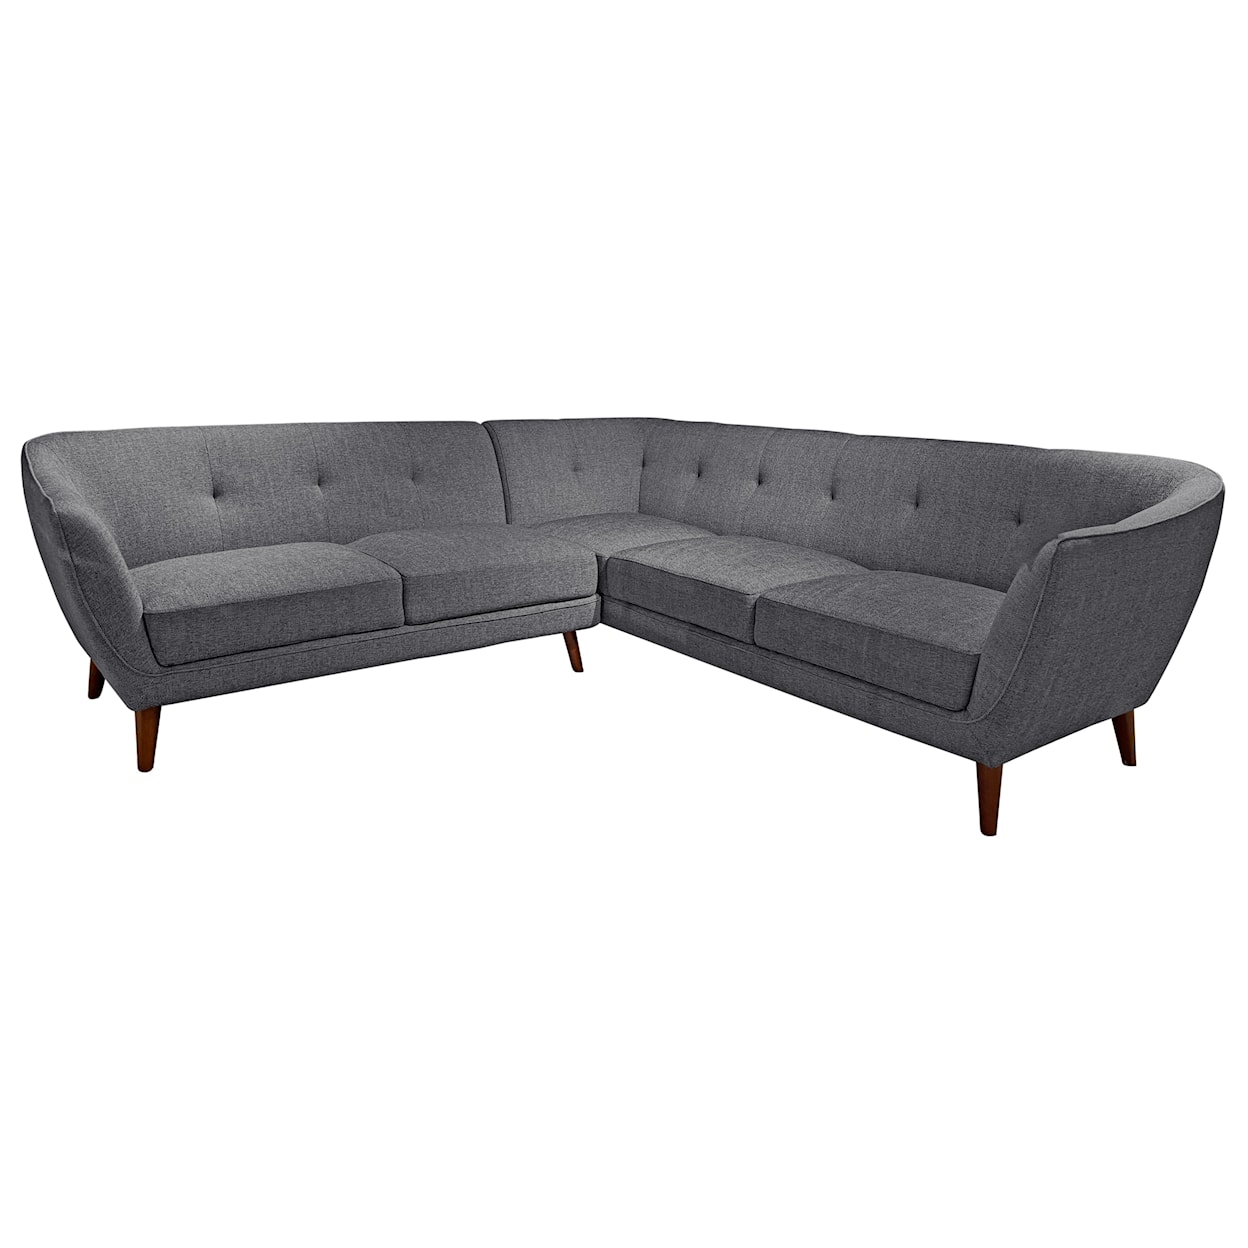 Urban Chic Avery Sectional